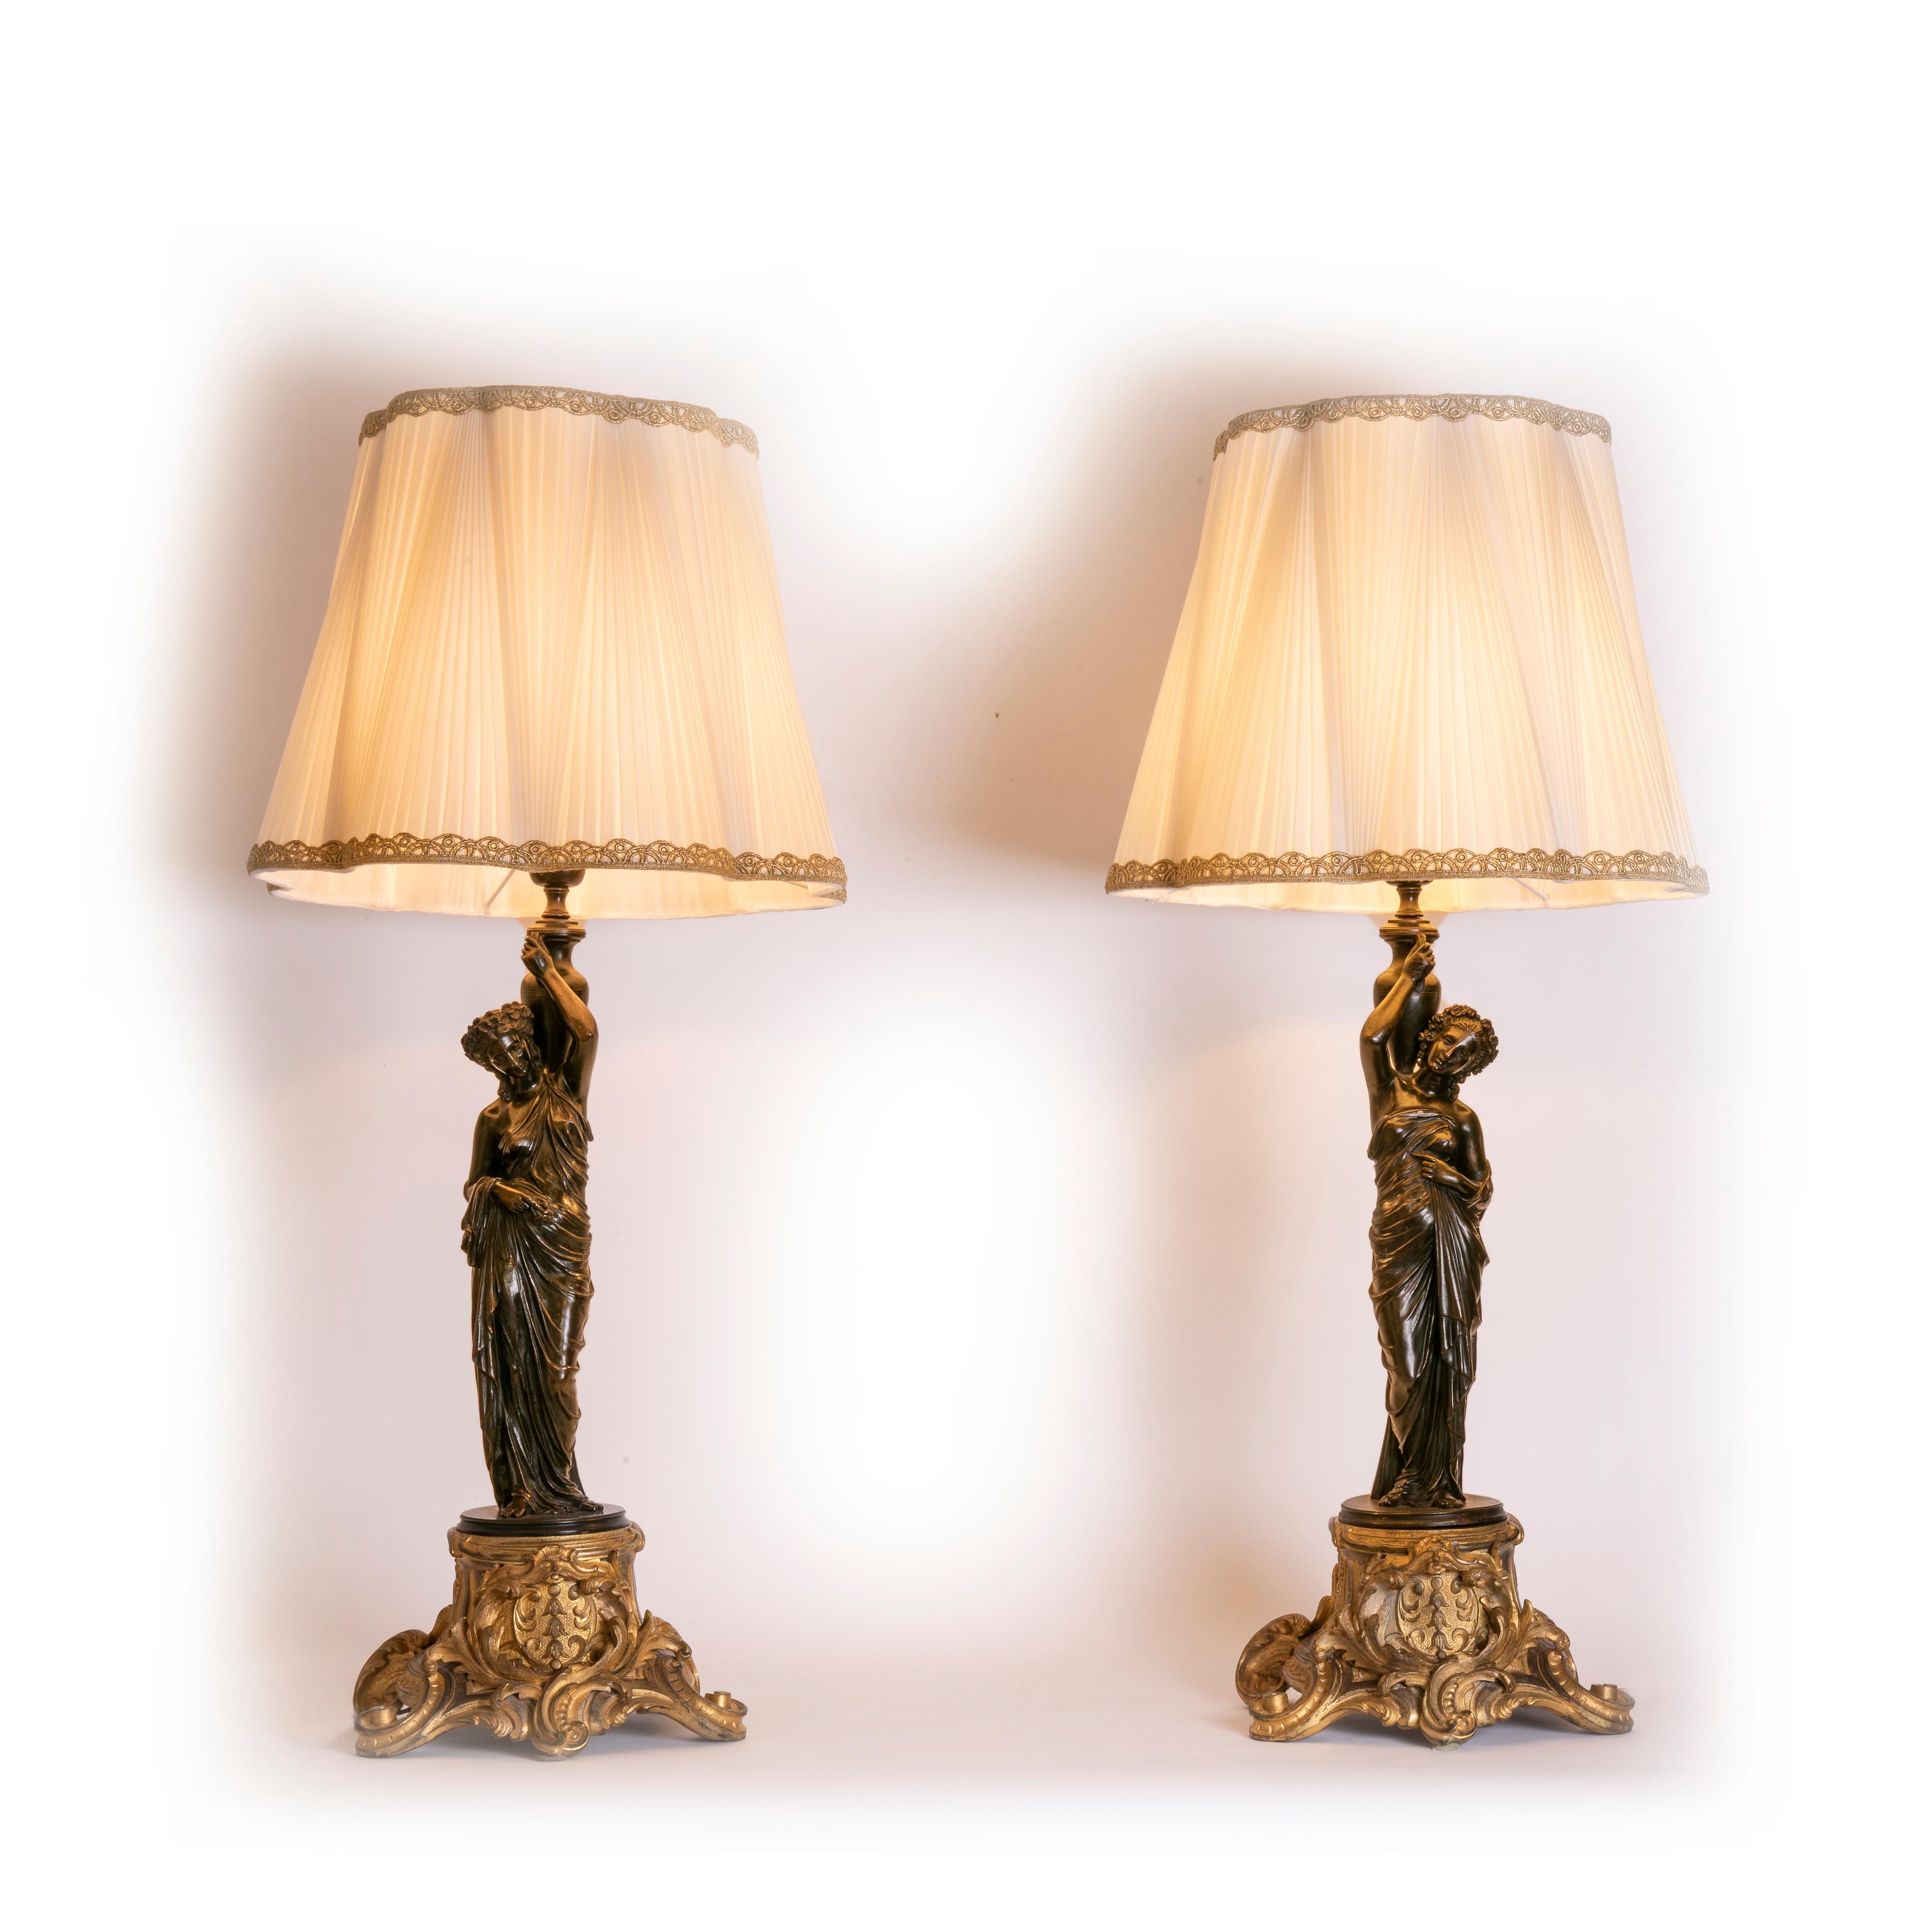 Pair of elegant patinated cast metal female figures of draped classical maidens, figural table lamps modeled as elaborately coiffed and robed neoclassical maidens holding  an amphora on the shoulders and garlands of flowers on the hairstyle.